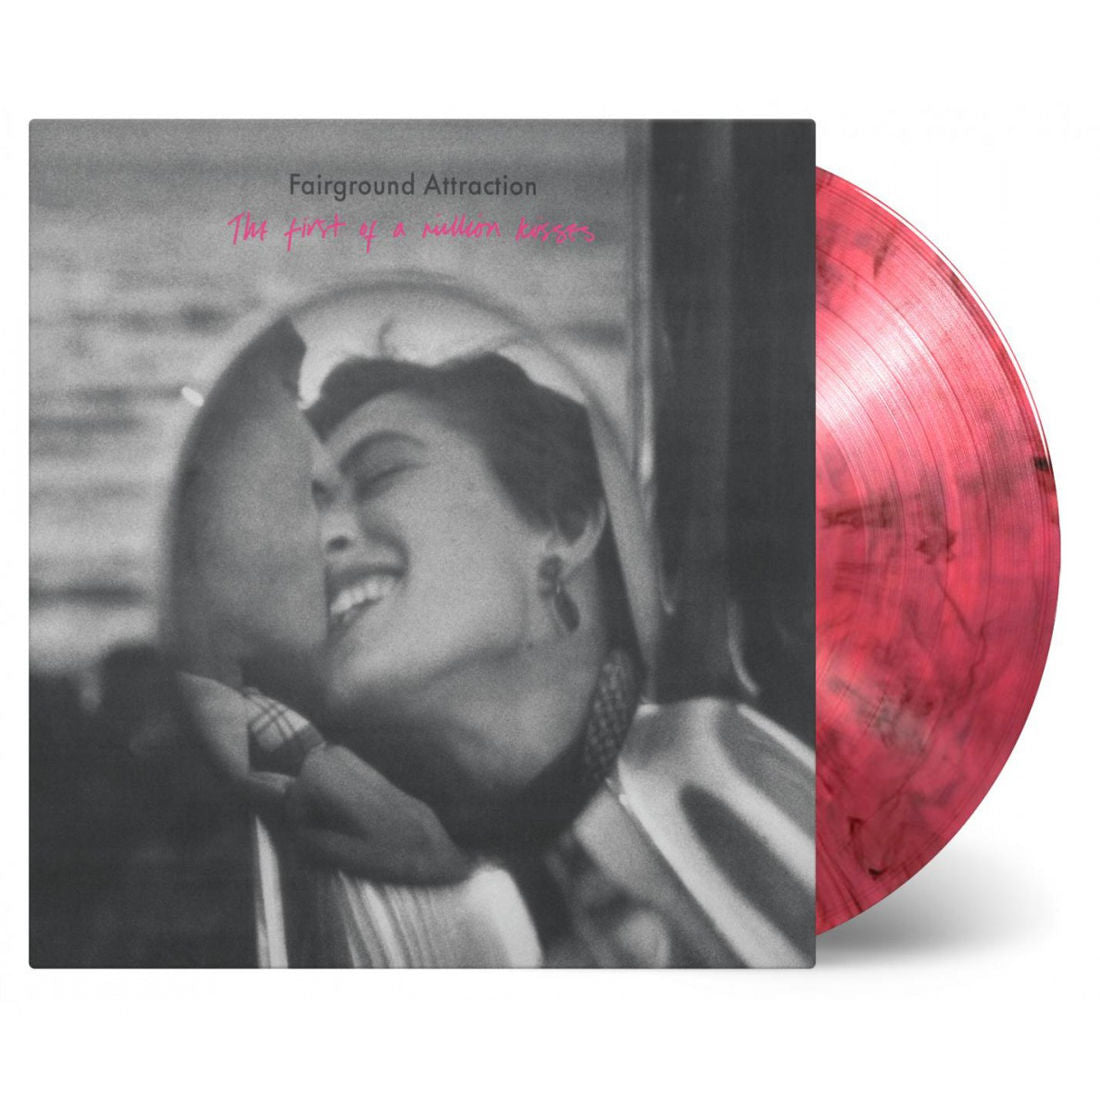 First Of A Million Kisses: Limited Red + Black Mixed Vinyl LP